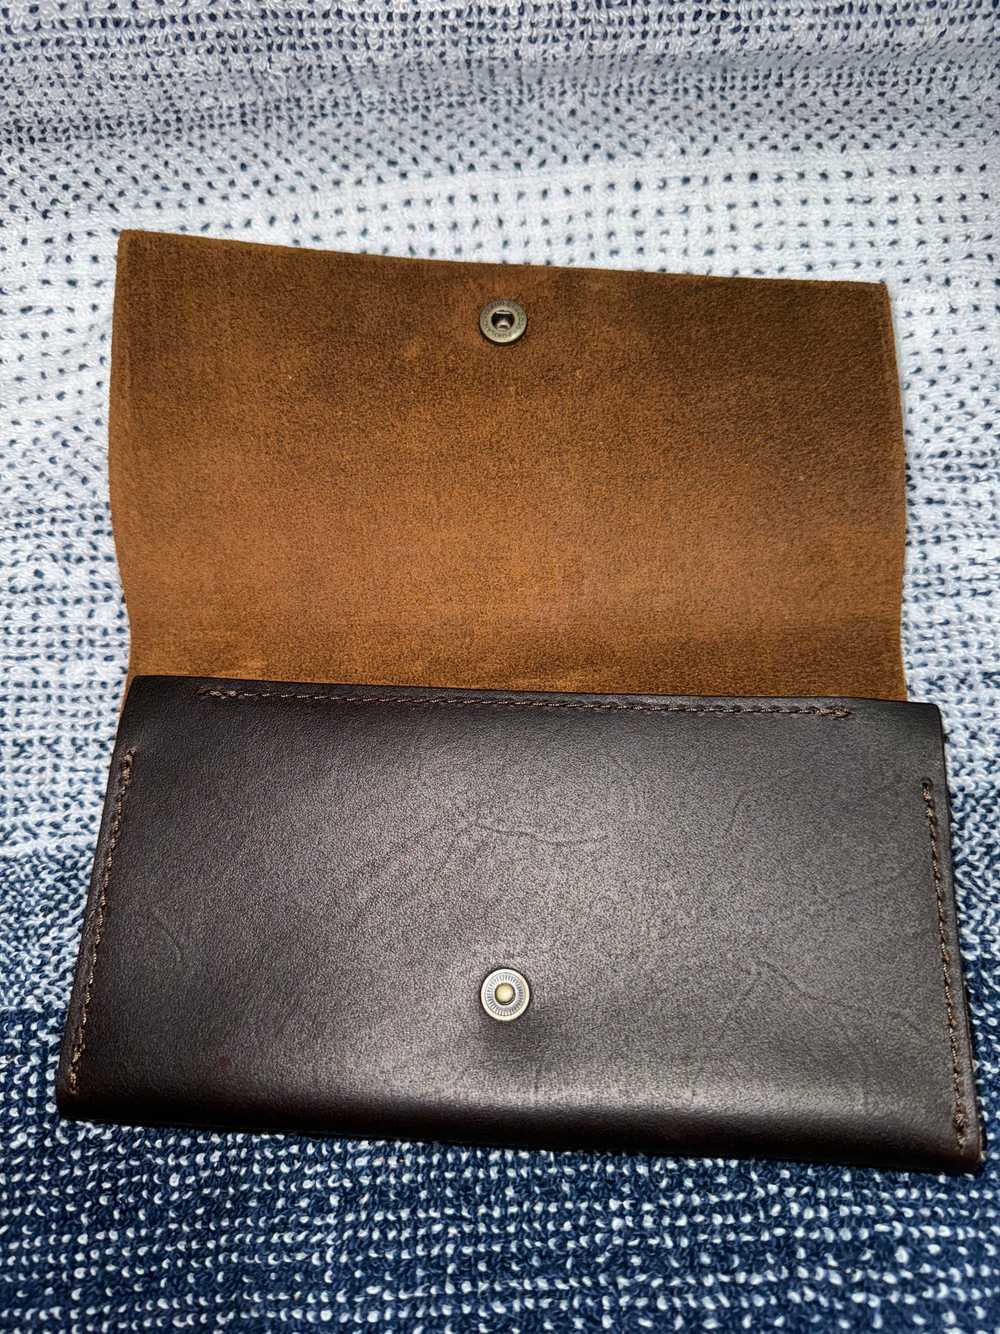 Portland Leather Leather Rancher Wallet - image 5